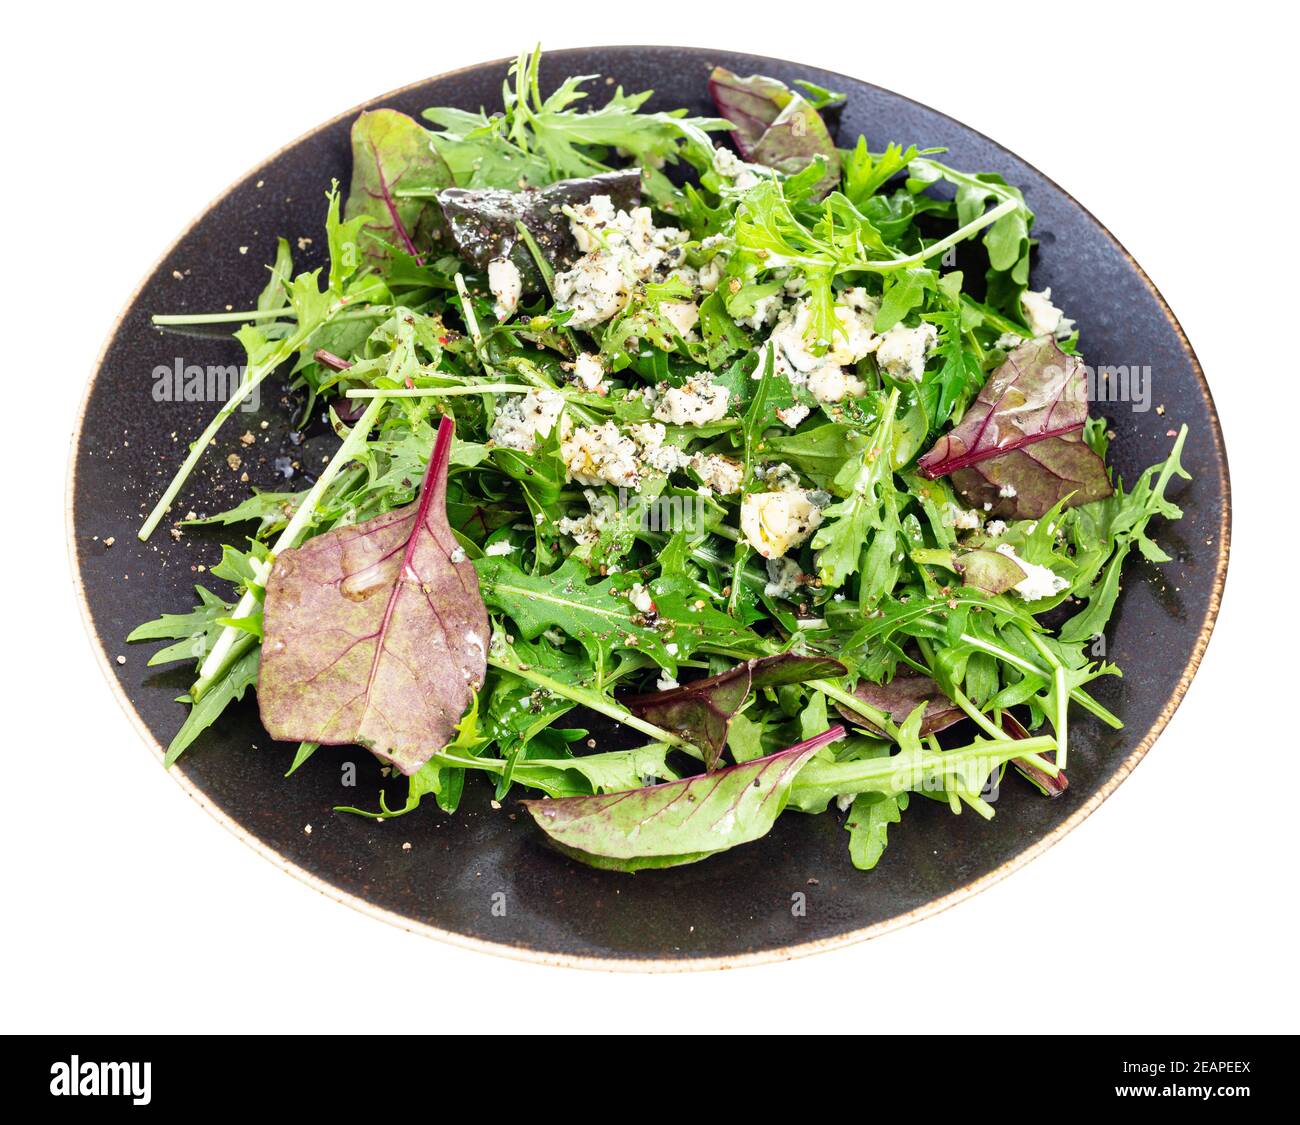 green salad with blue cheese on plate isolated Stock Photo